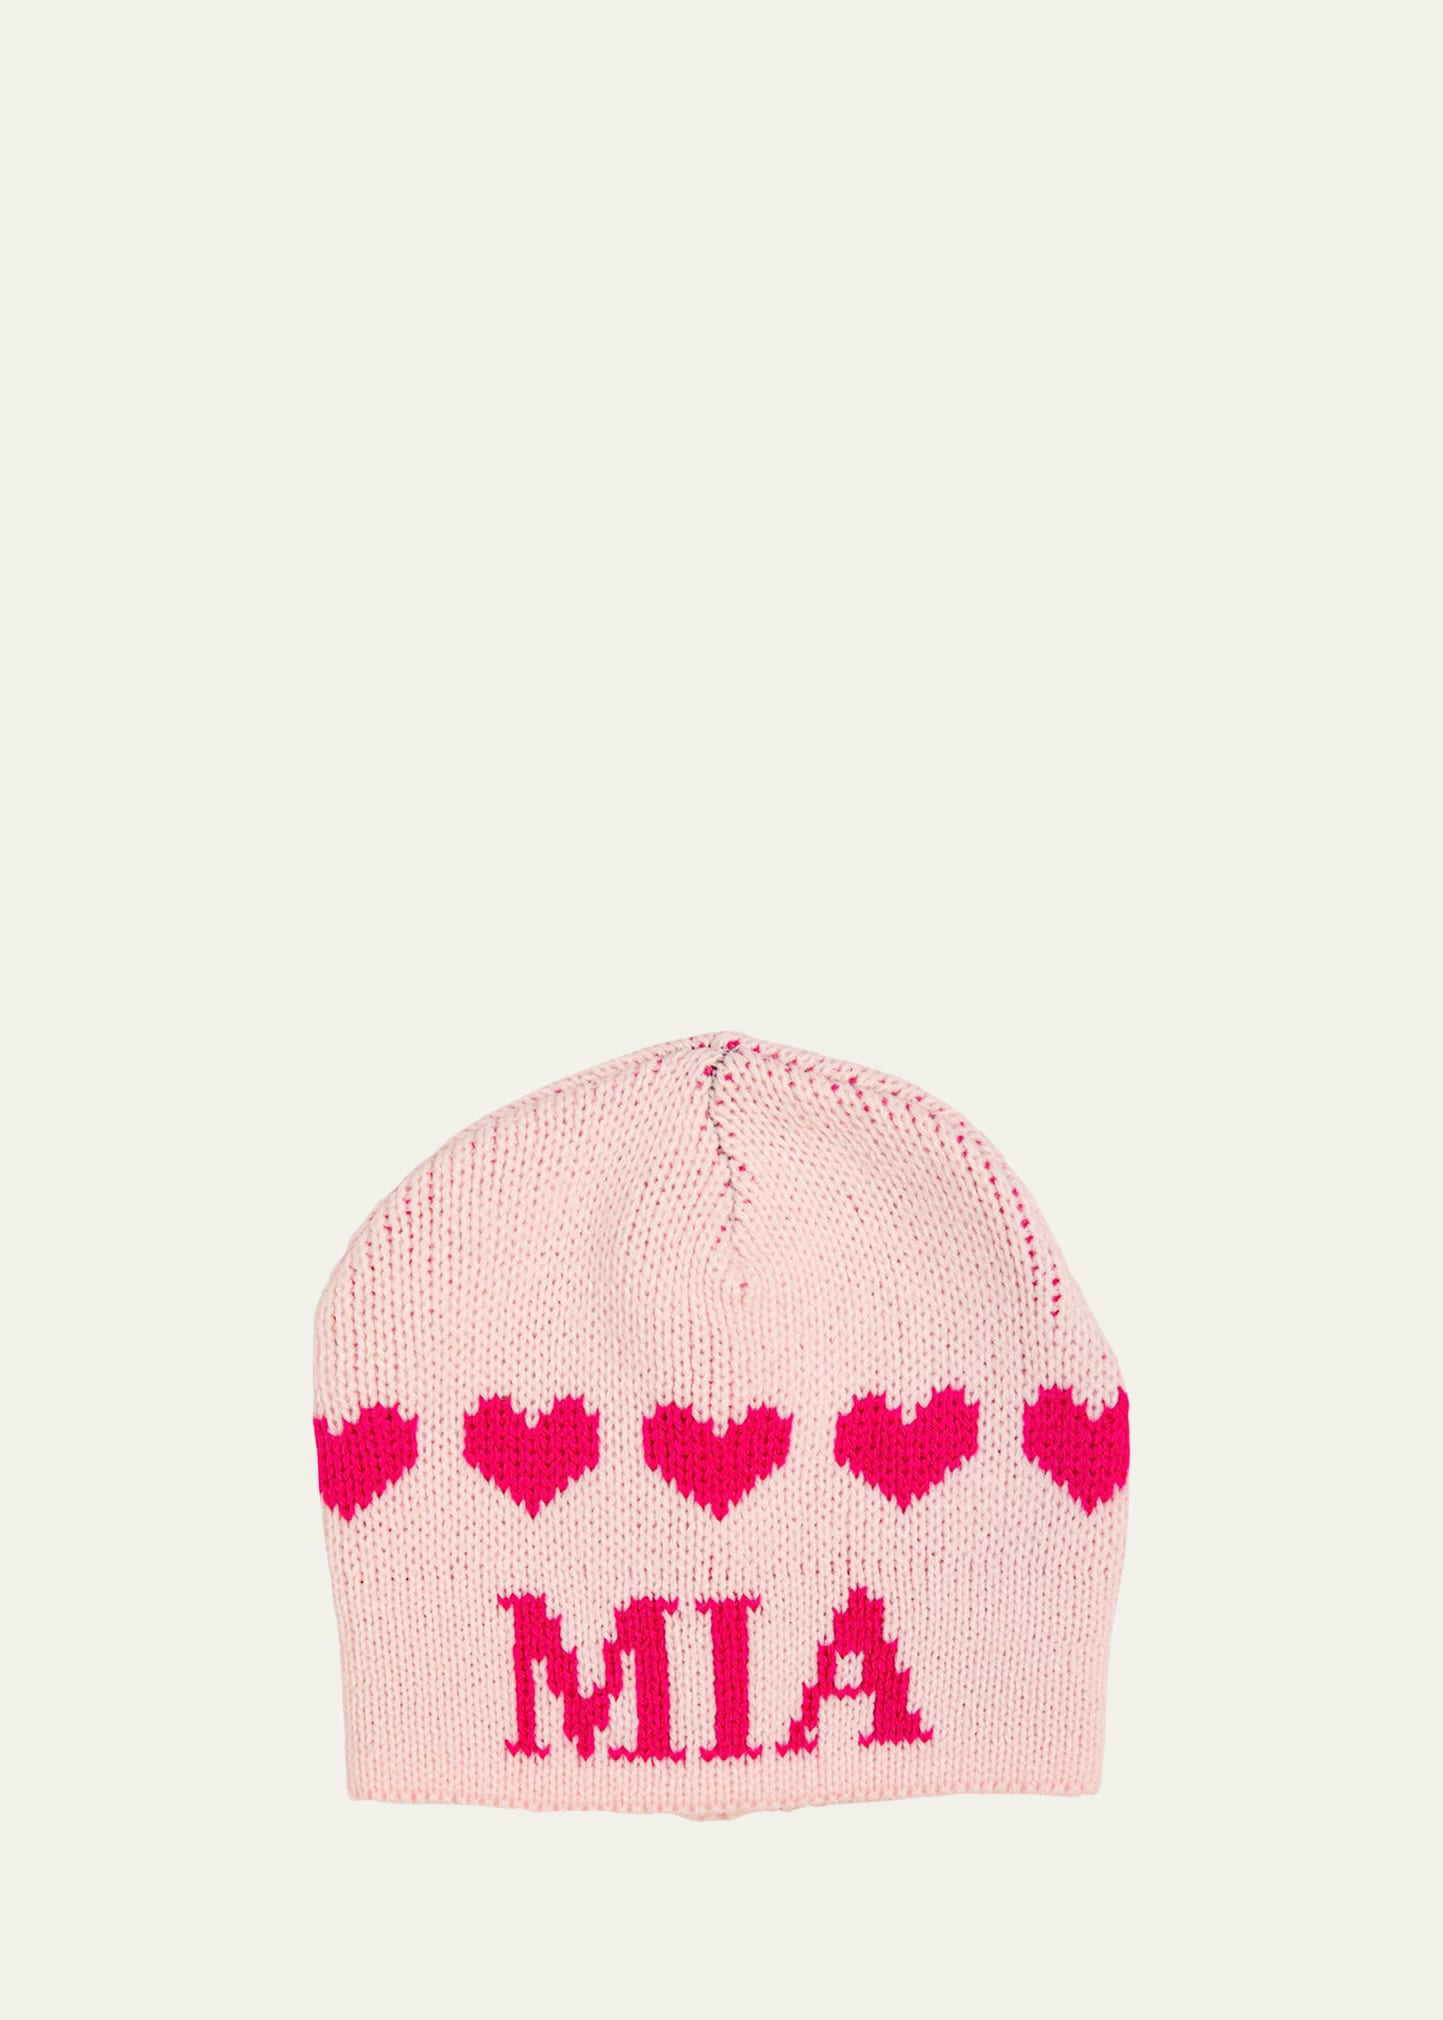 Kid's String of Hearts Beanie Hat, Personalized